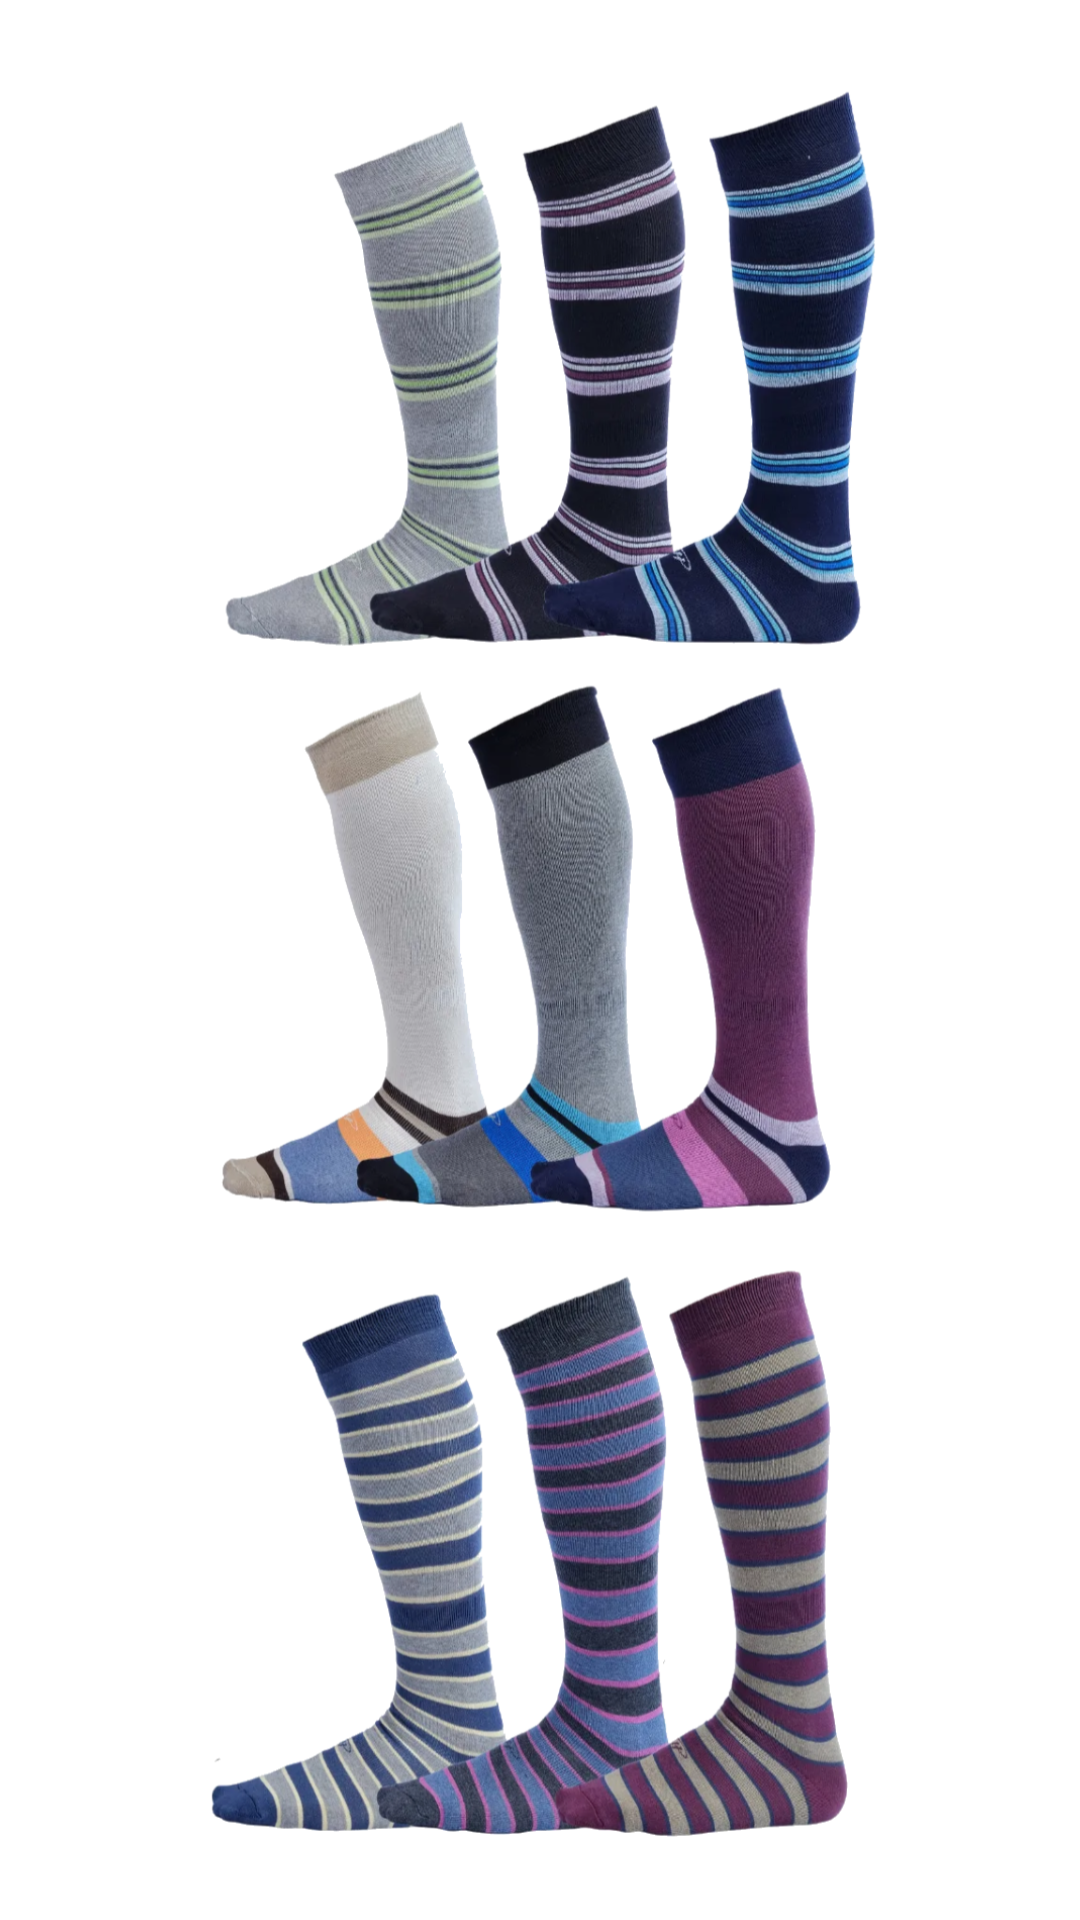 Get Back from PTO with 9-pair pack socks – Pierre Henry Socks